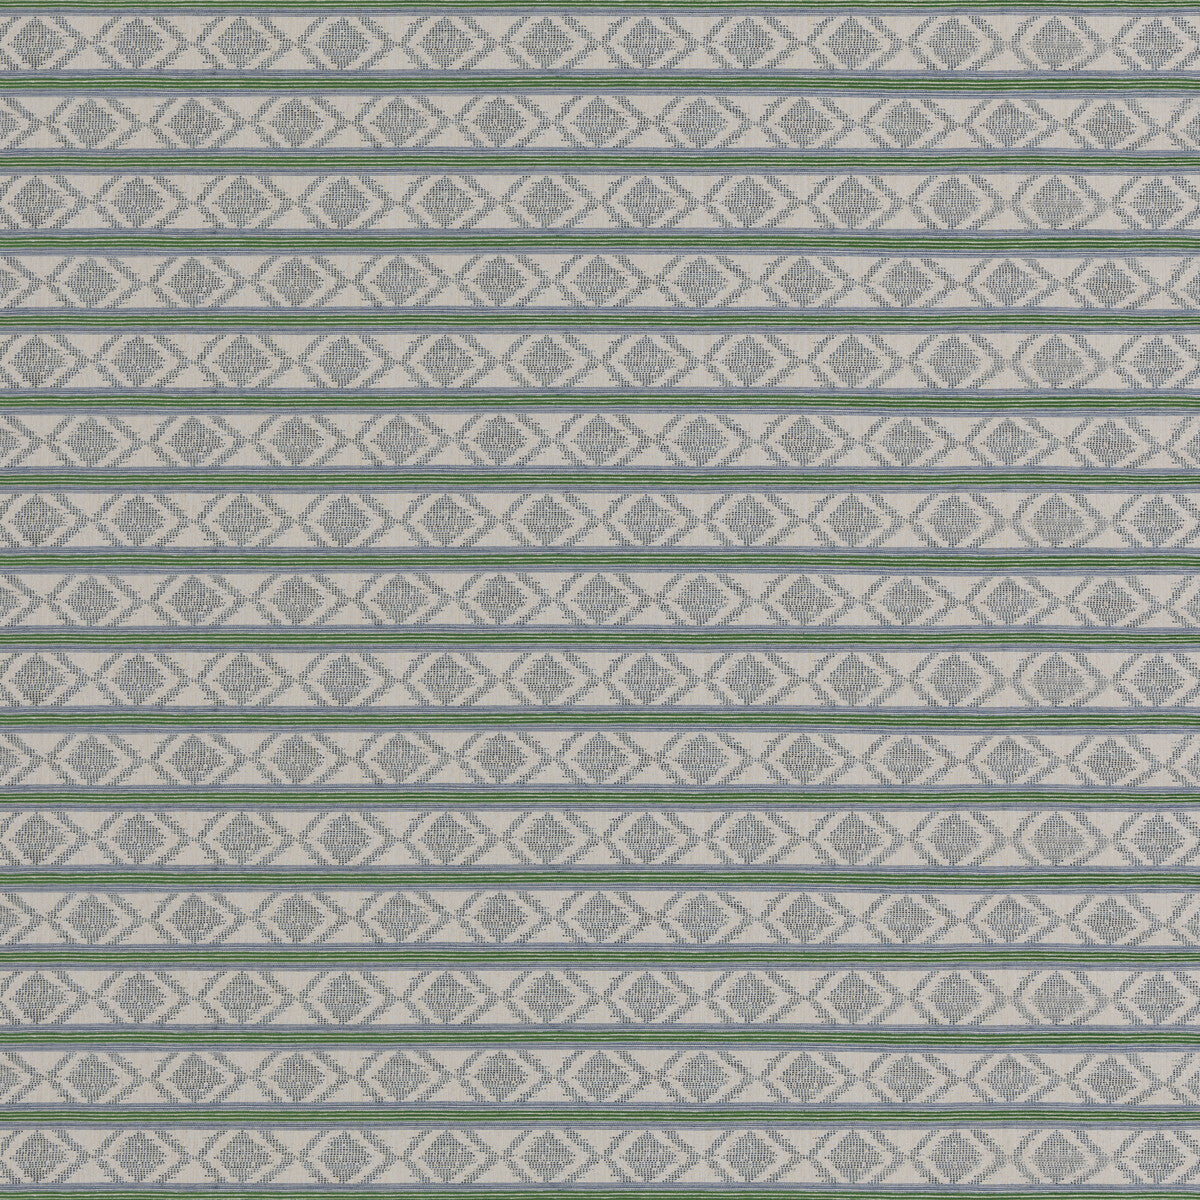 Burford Stripe fabric in blue/green color - pattern BF11034.7.0 - by G P &amp; J Baker in the Burford Weaves collection